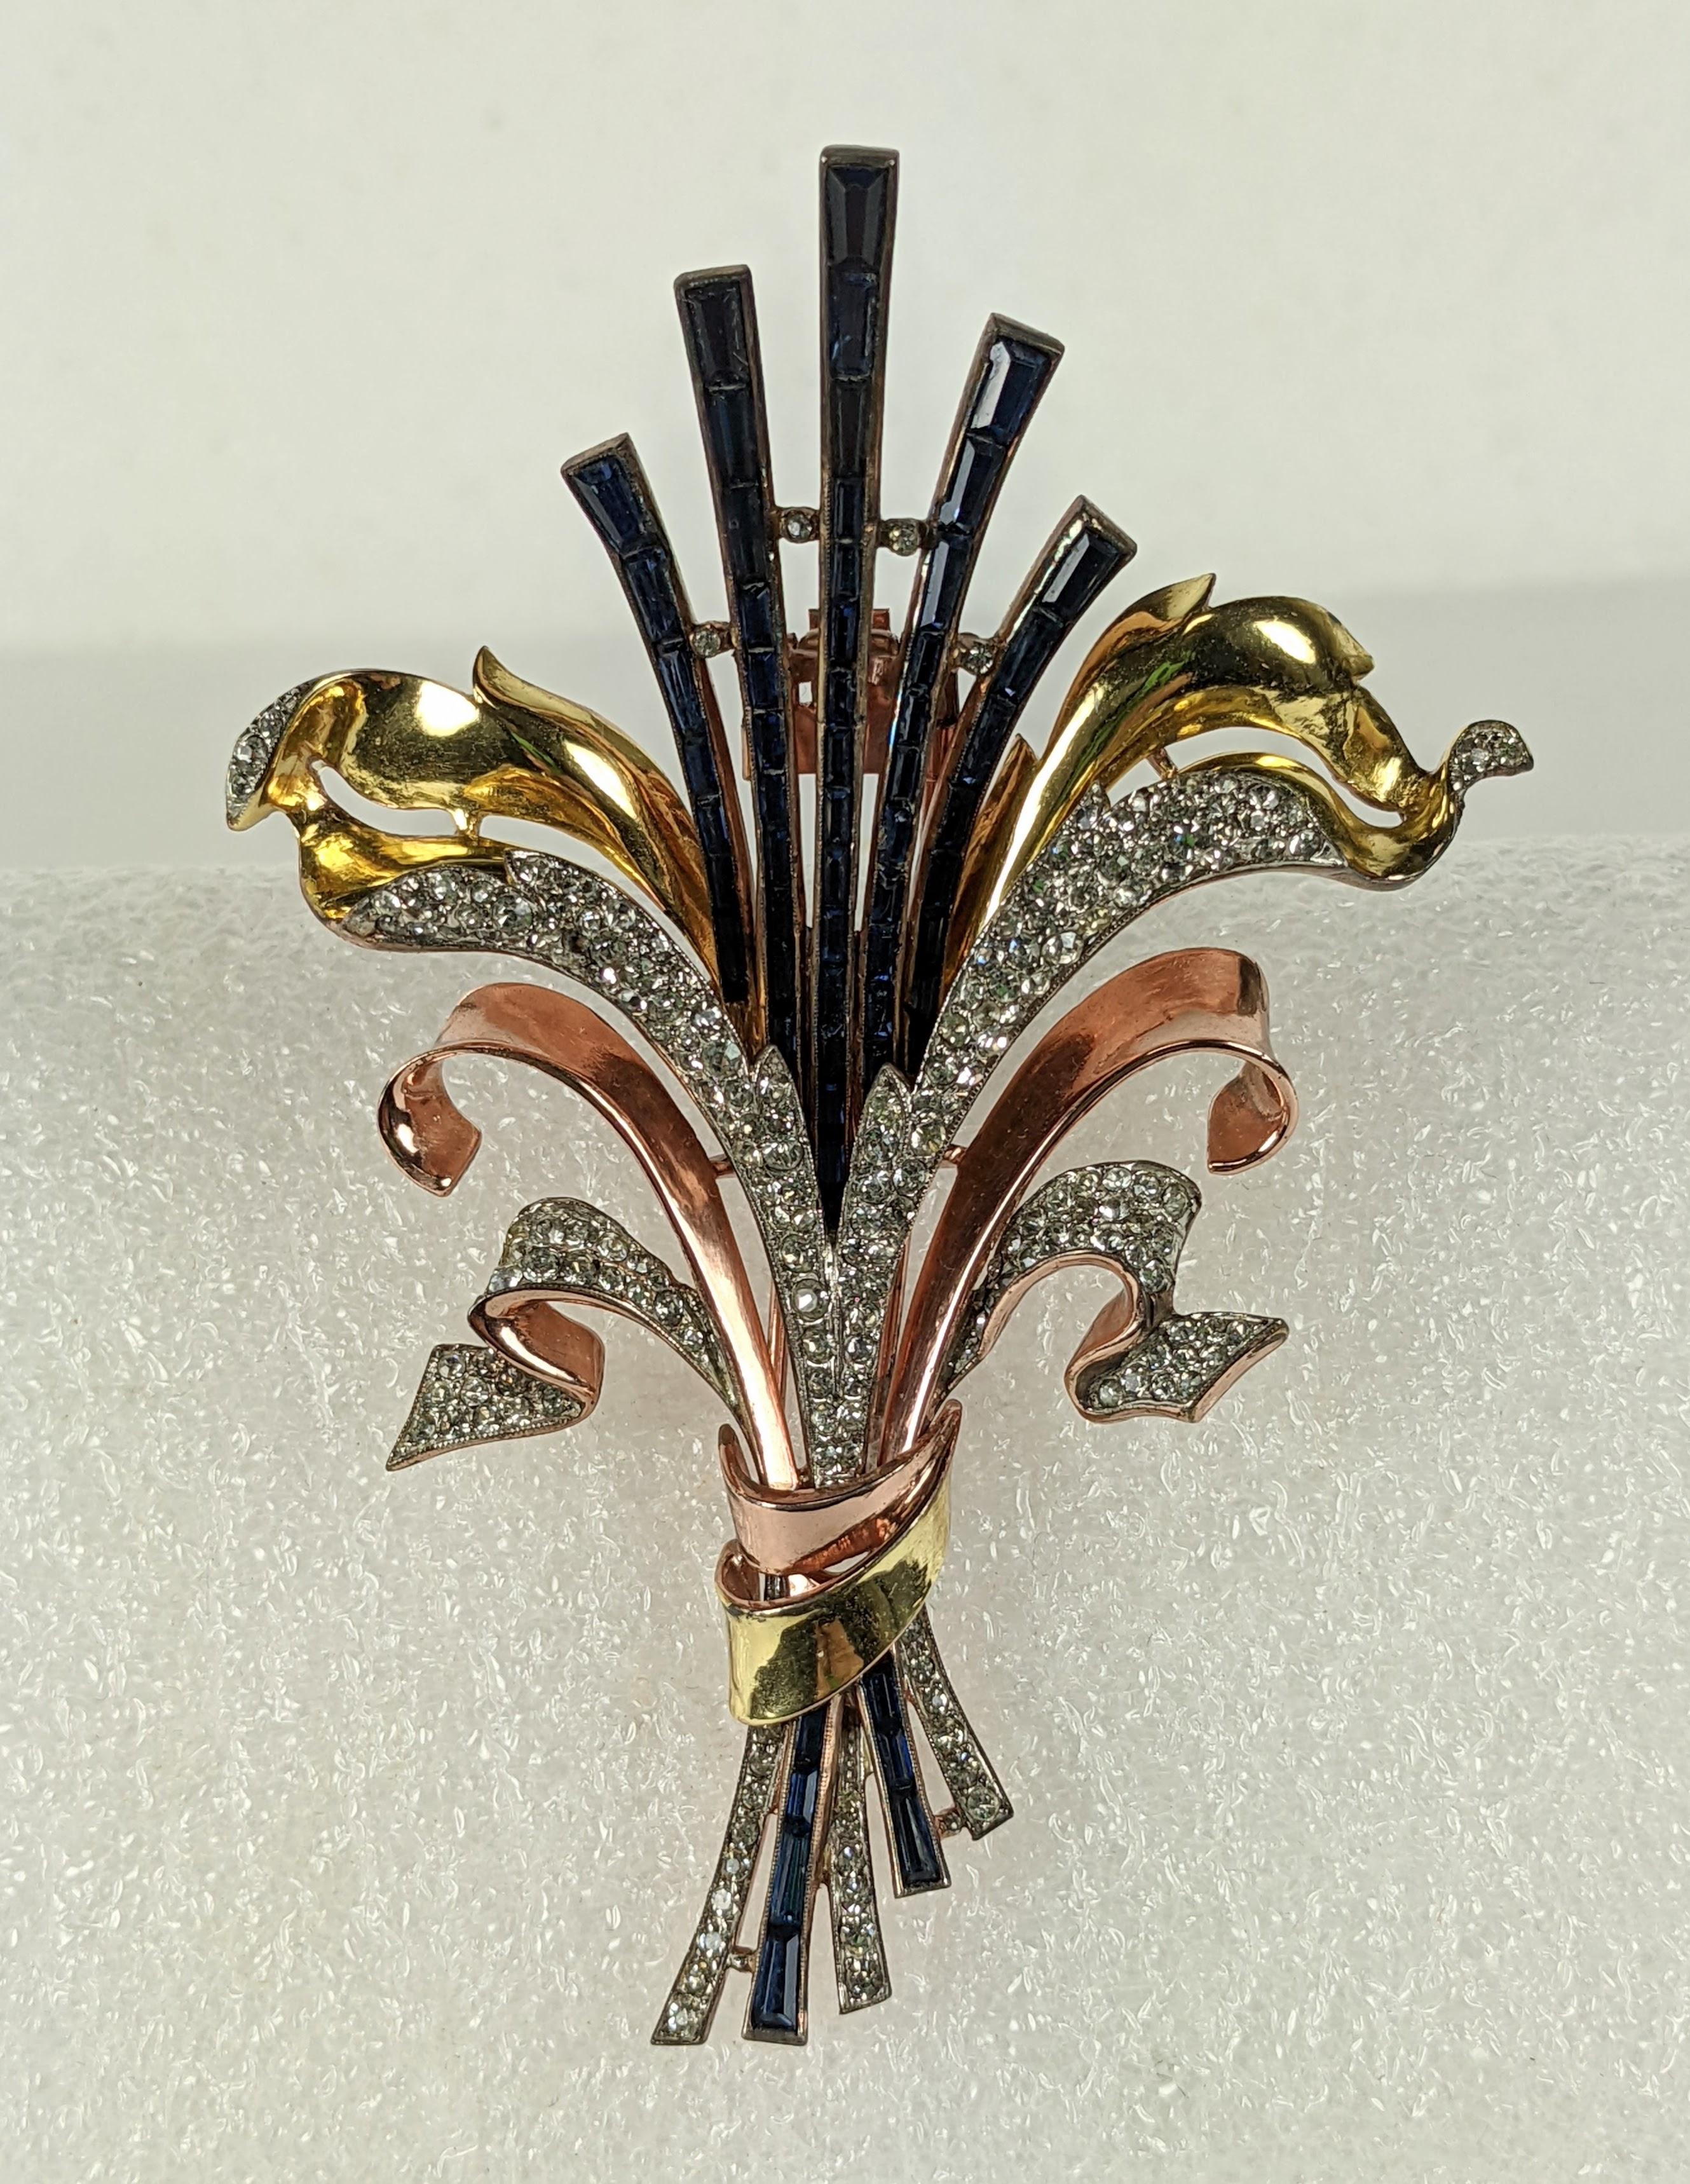 Important Alfred Philippe for Trifari Retro stylized lily flower clip brooch. Of sapphire pave keystone baguettes, set in rhodium base metal with two color rose and yellow gold plate. Unfurling double leaf swirls are trimmed with crystal rhinestone